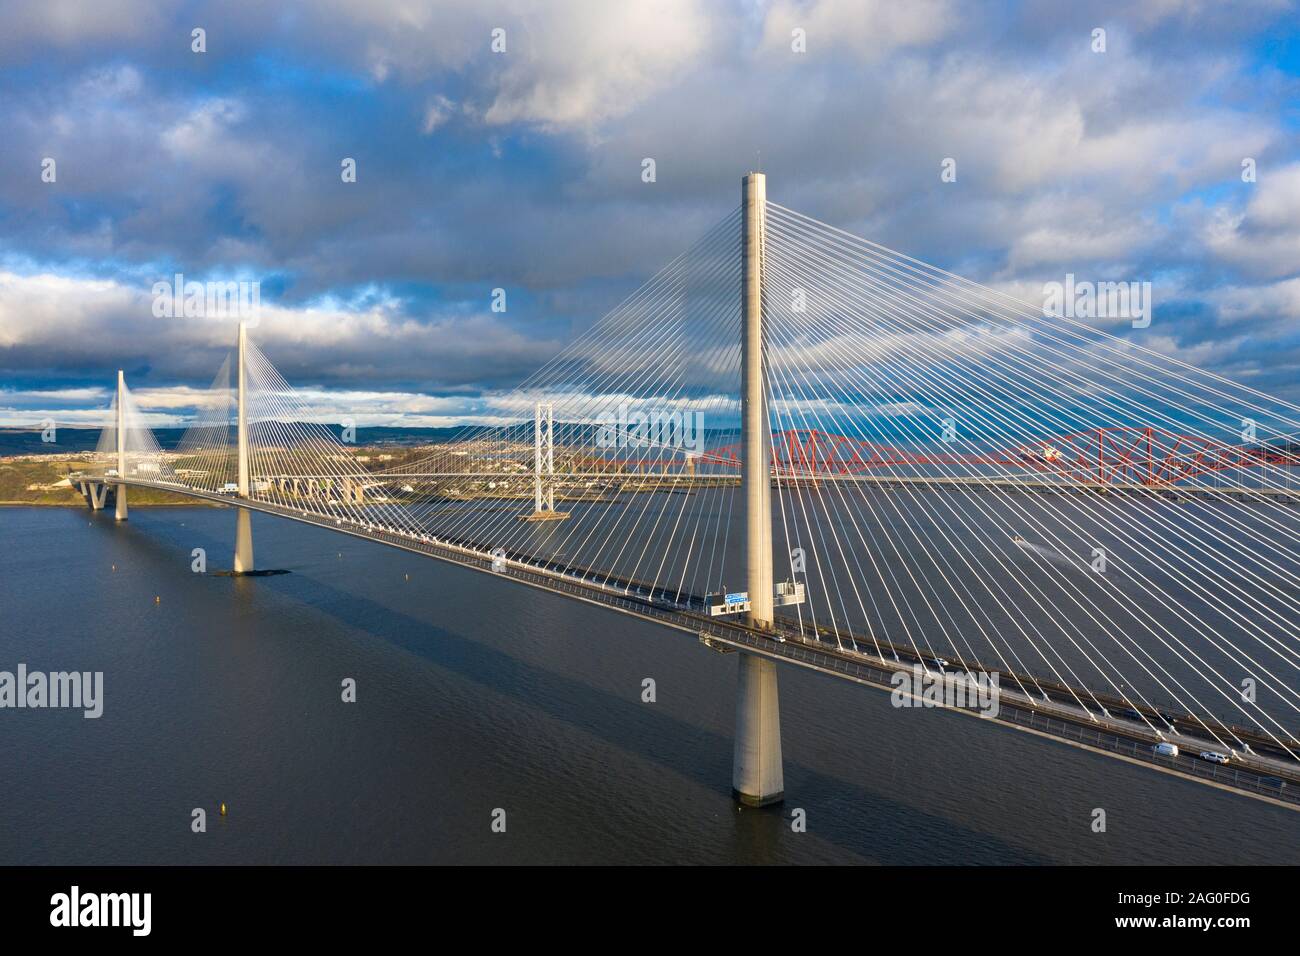 Aerial view of the Queensferry Crossing bridge spanning the Firth of Forth river in Scotland, UK. Stock Photo